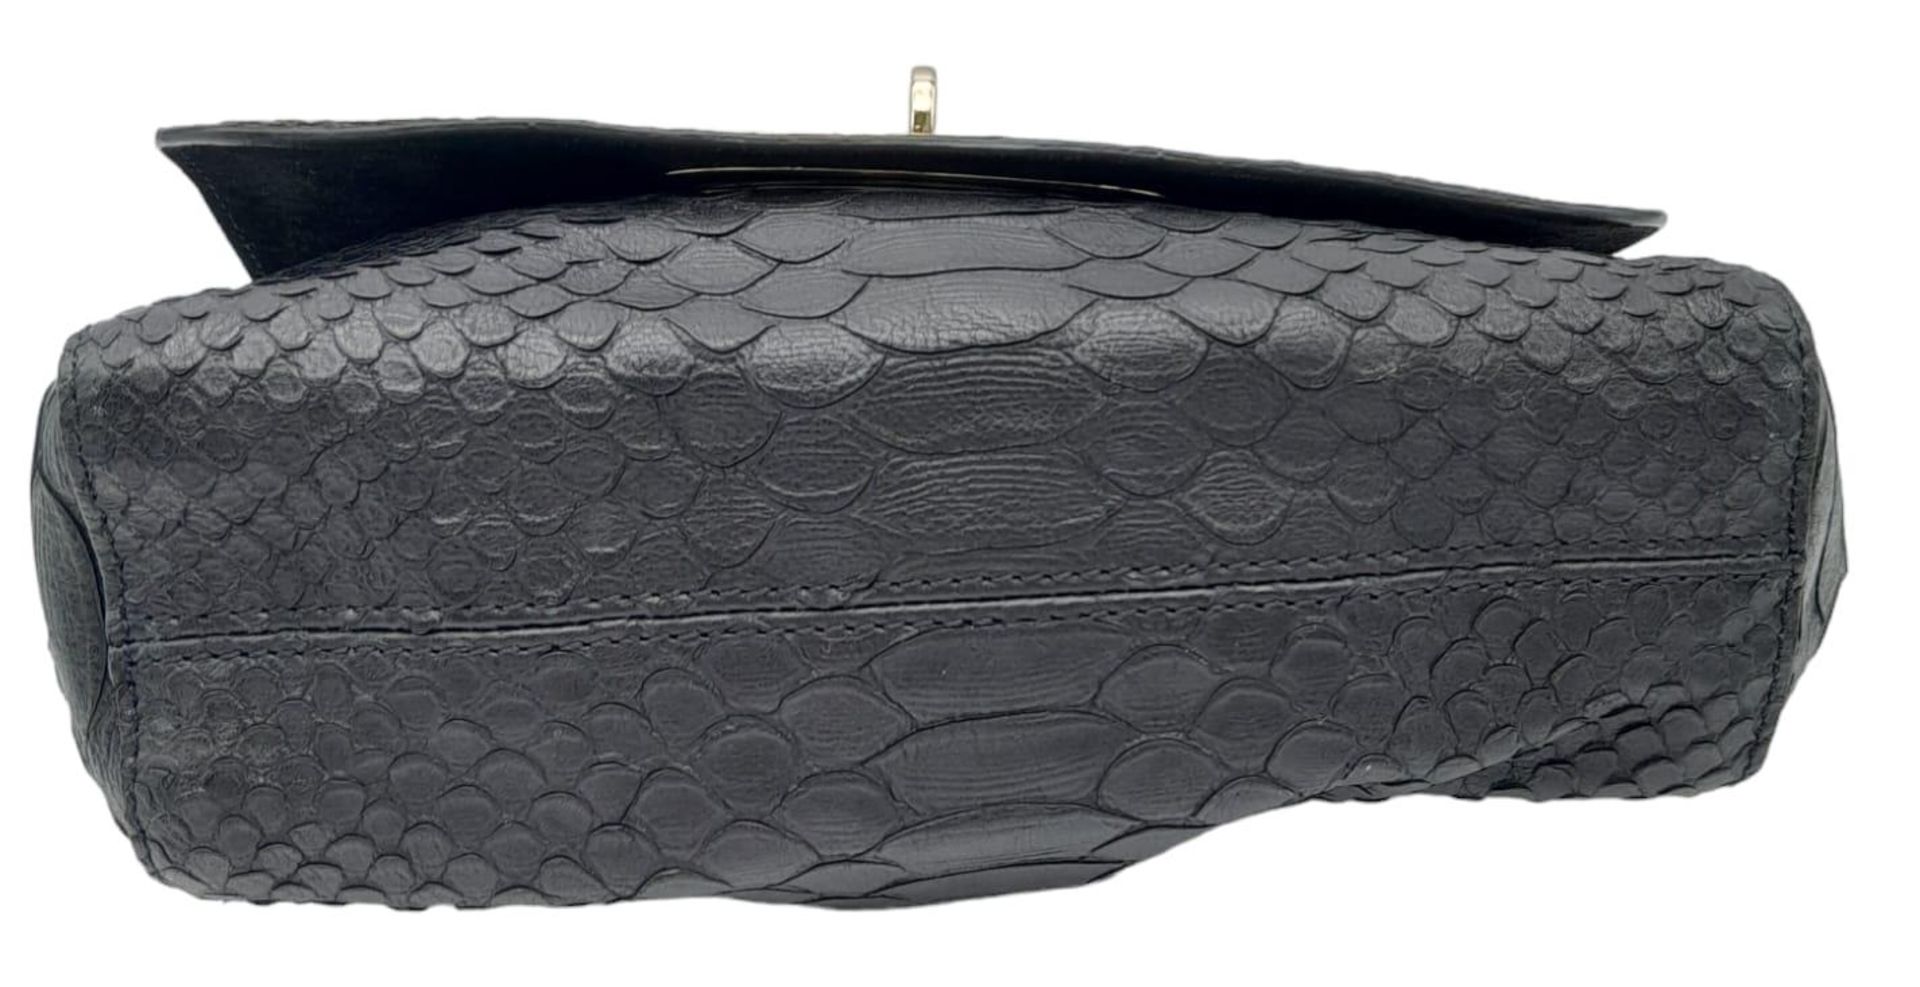 A Mulberry Black Cecily Shoulder Bag. Snakeskin exterior with gold-toned hardware, chain and leather - Image 5 of 8